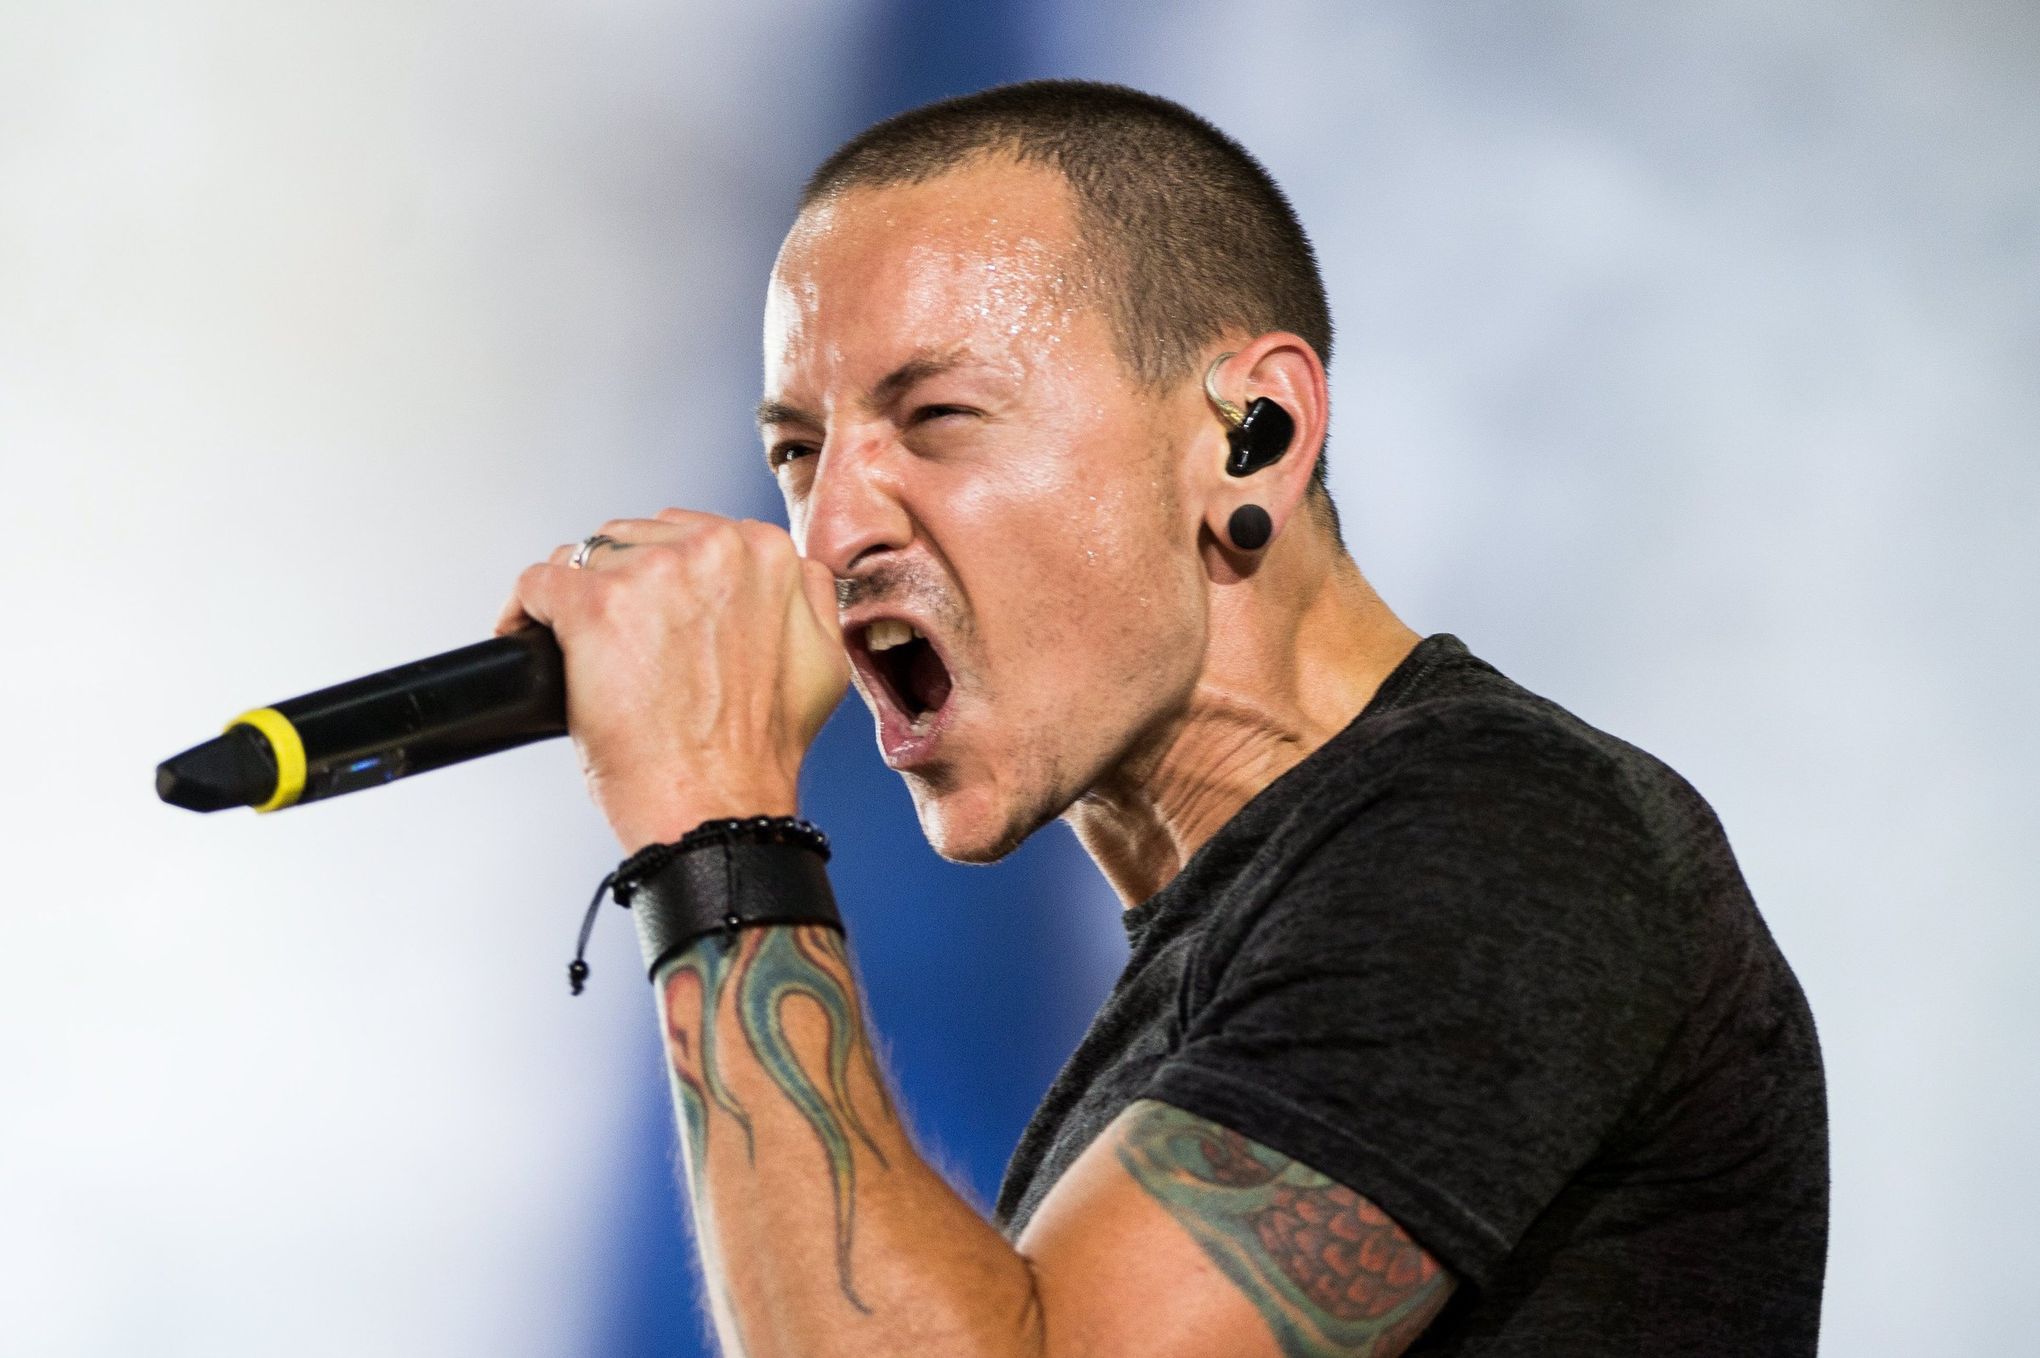 LINKIN PARK Members Have Been Working On New Music